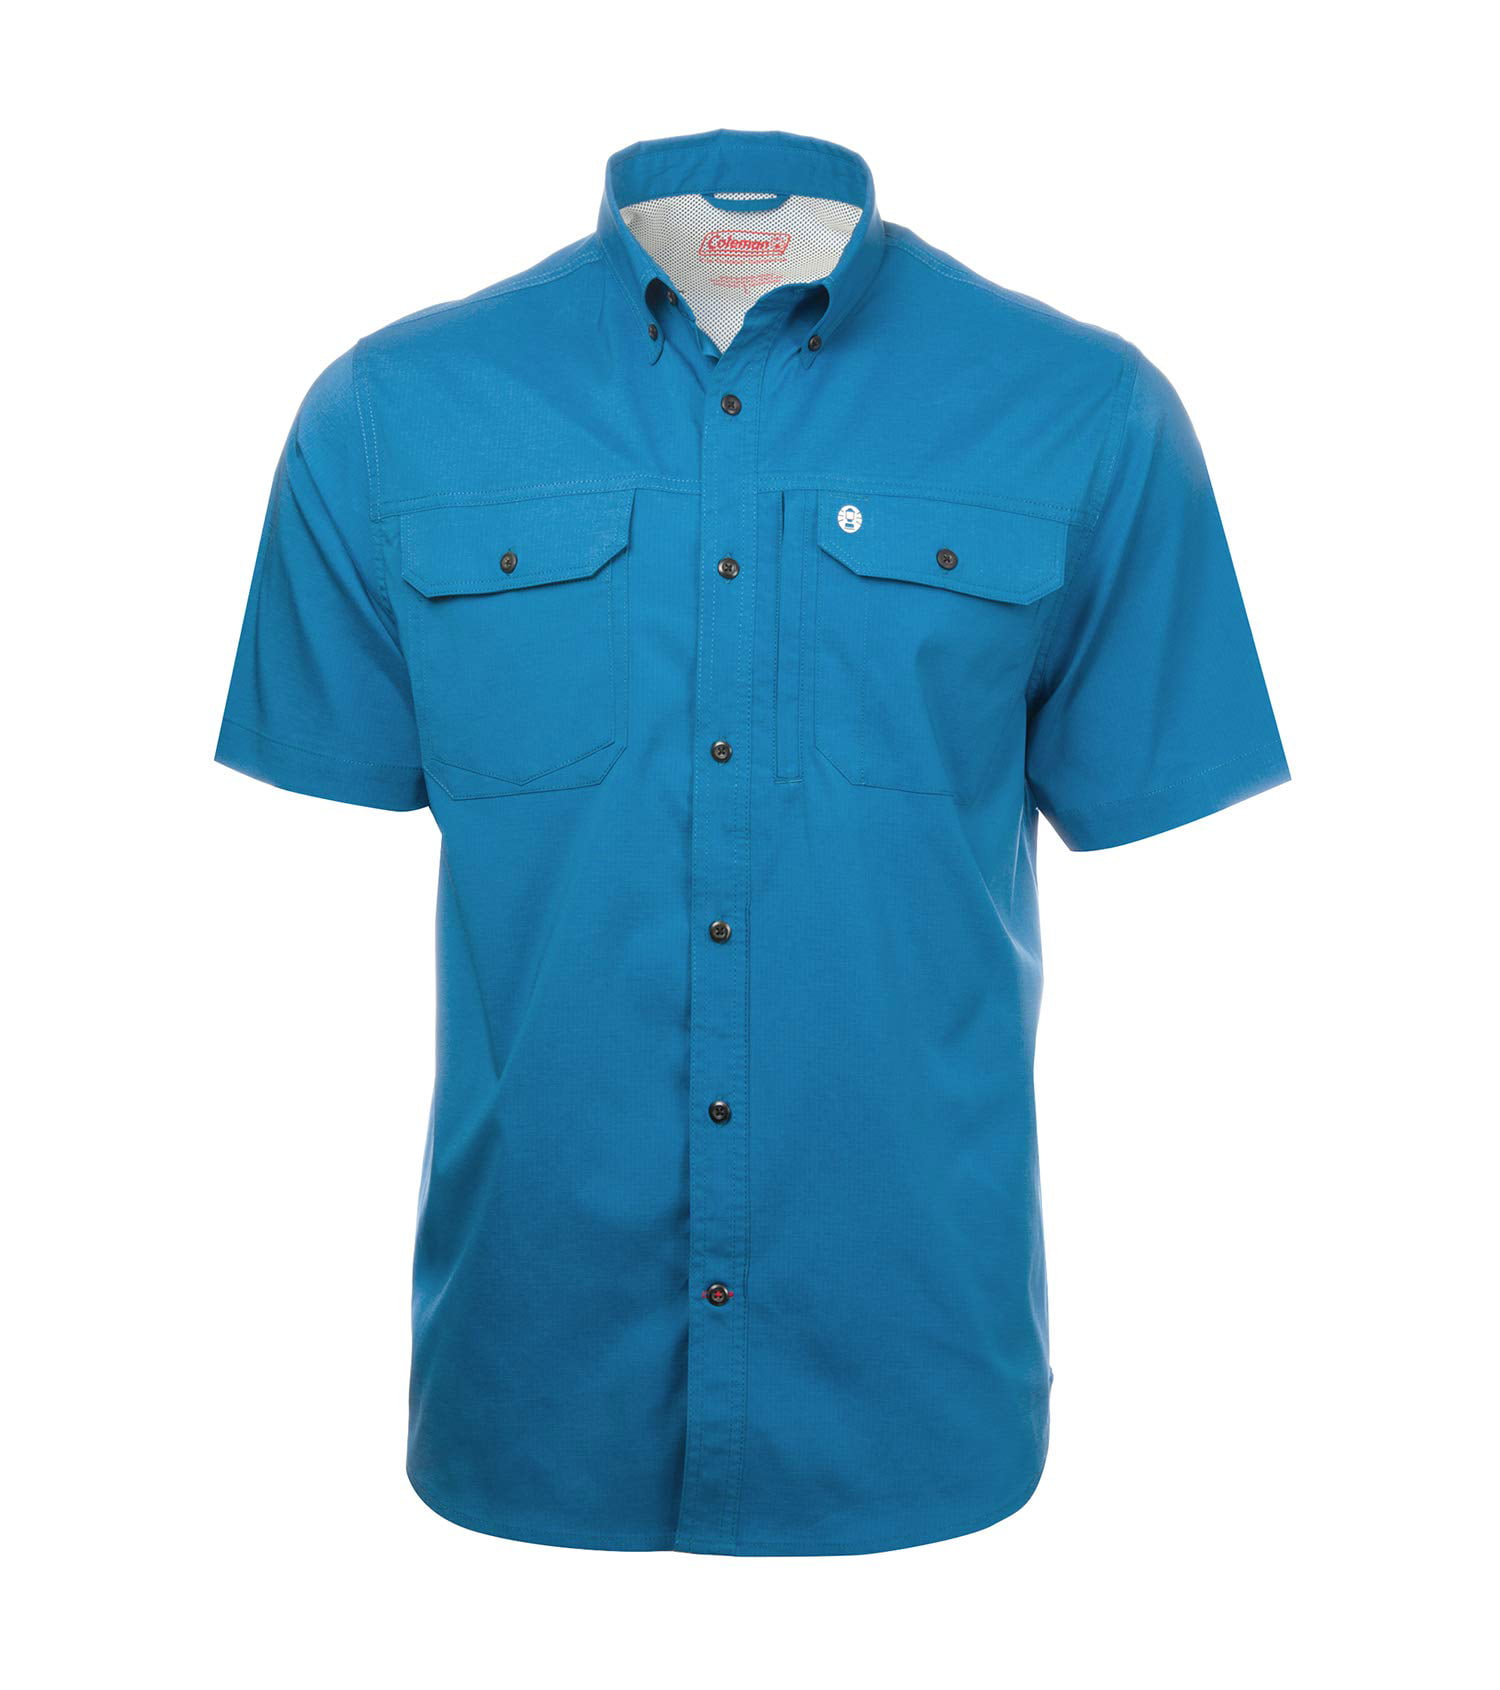 Coleman Fishing Shirts For Men with UPF Sun Proof and Moisture Wicking ...